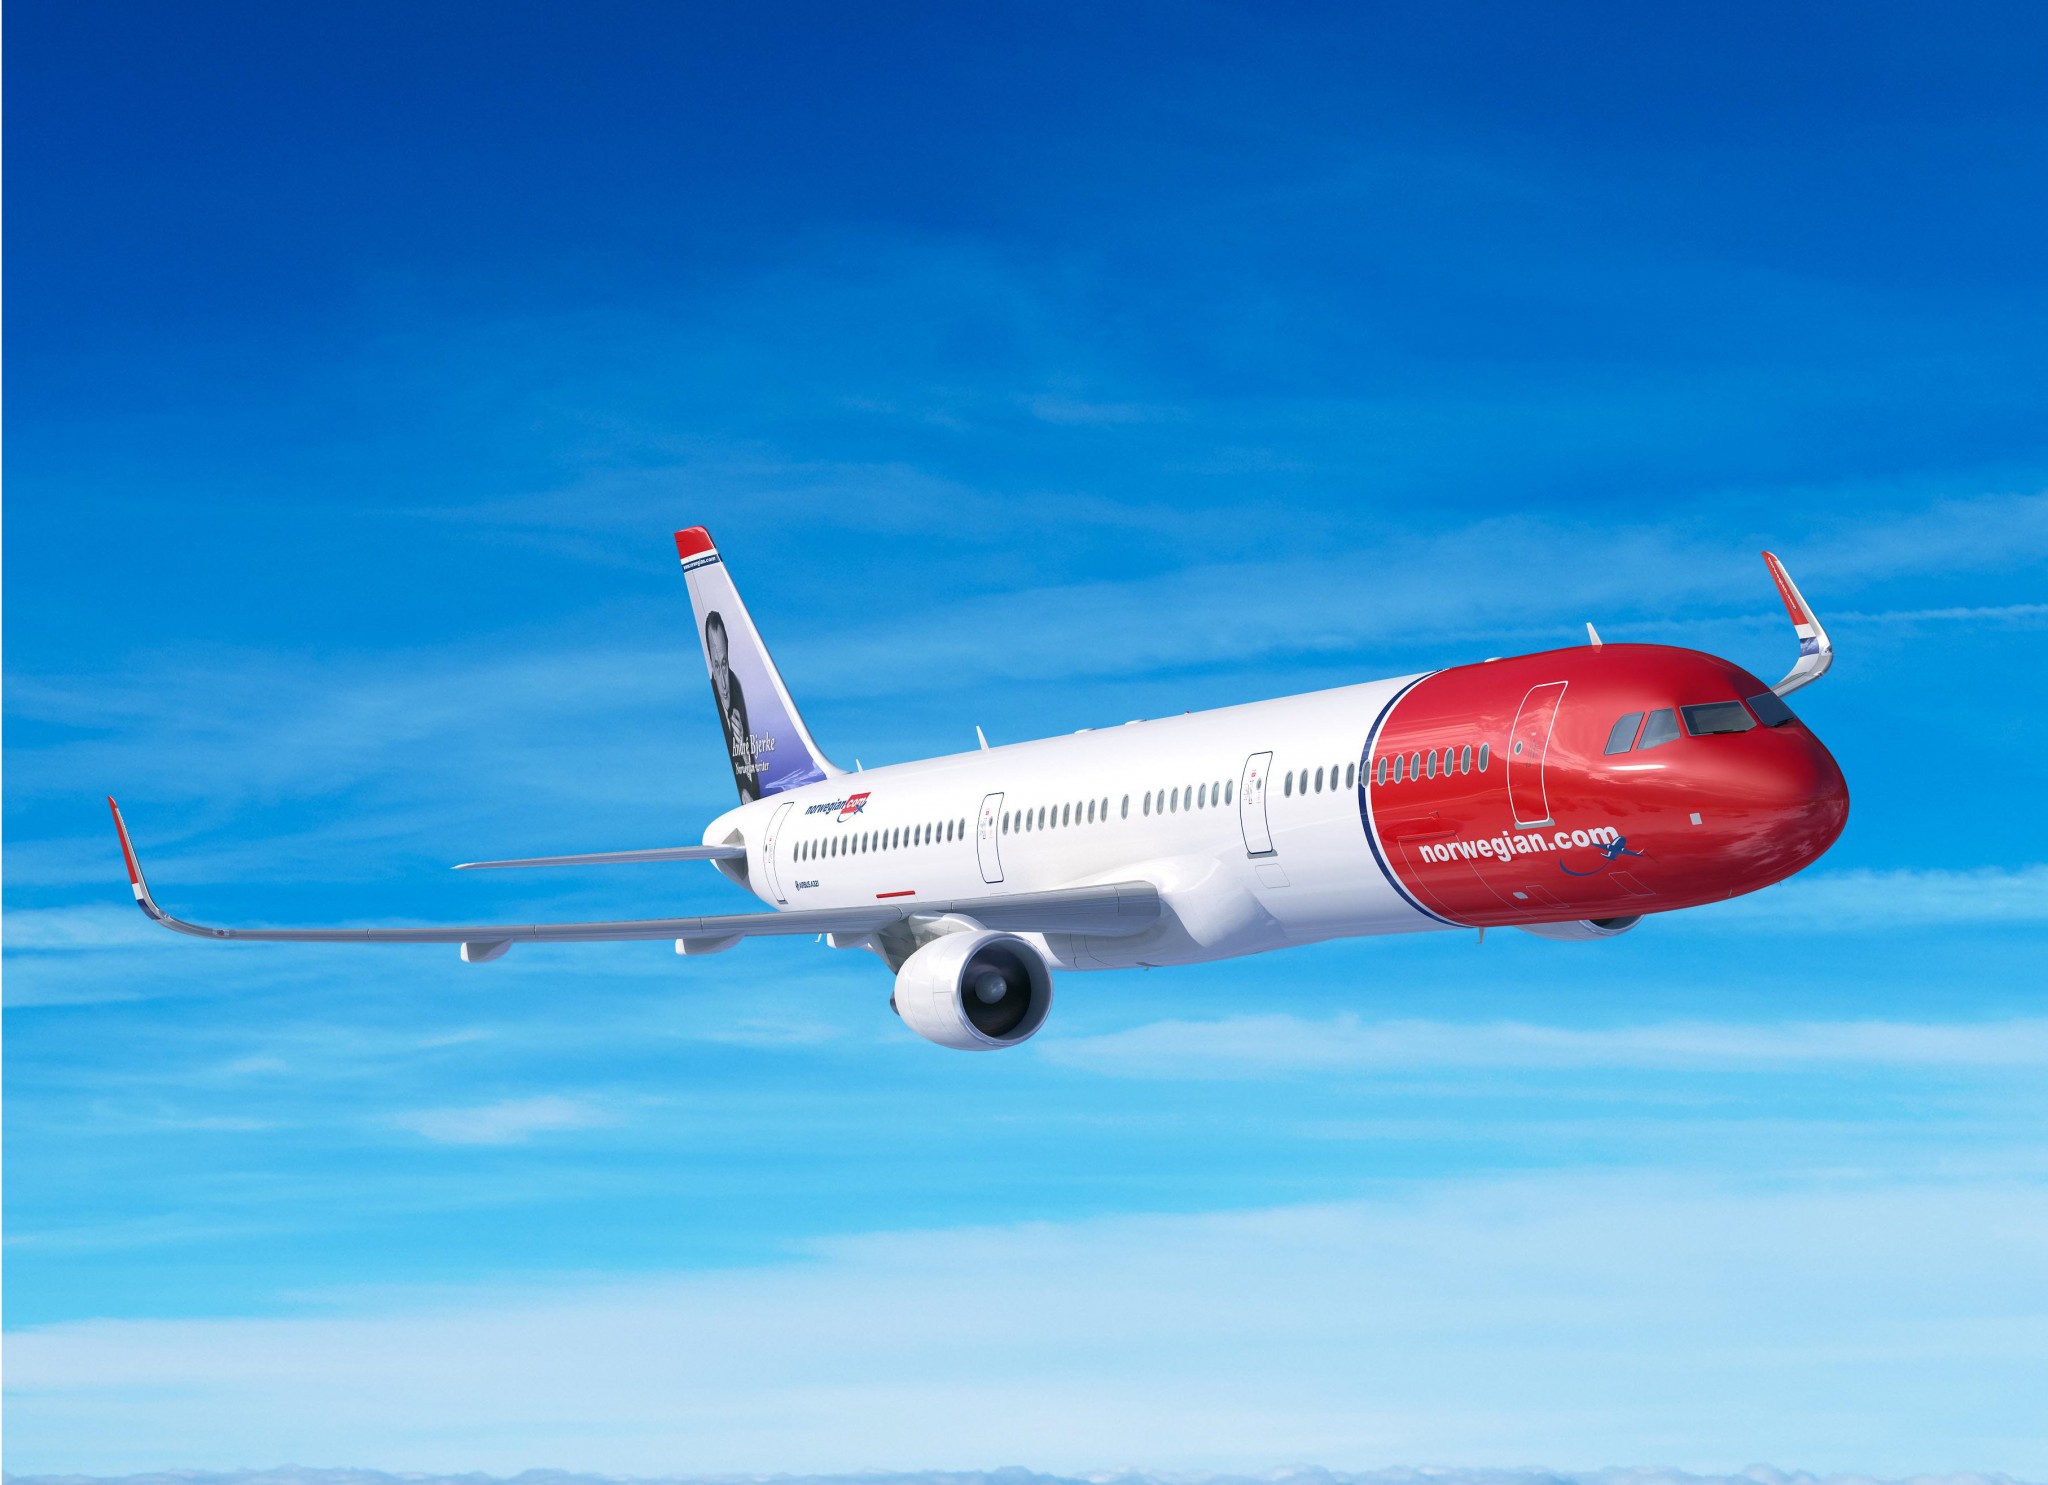 Norwegian reports 12 per cent passenger growth in March